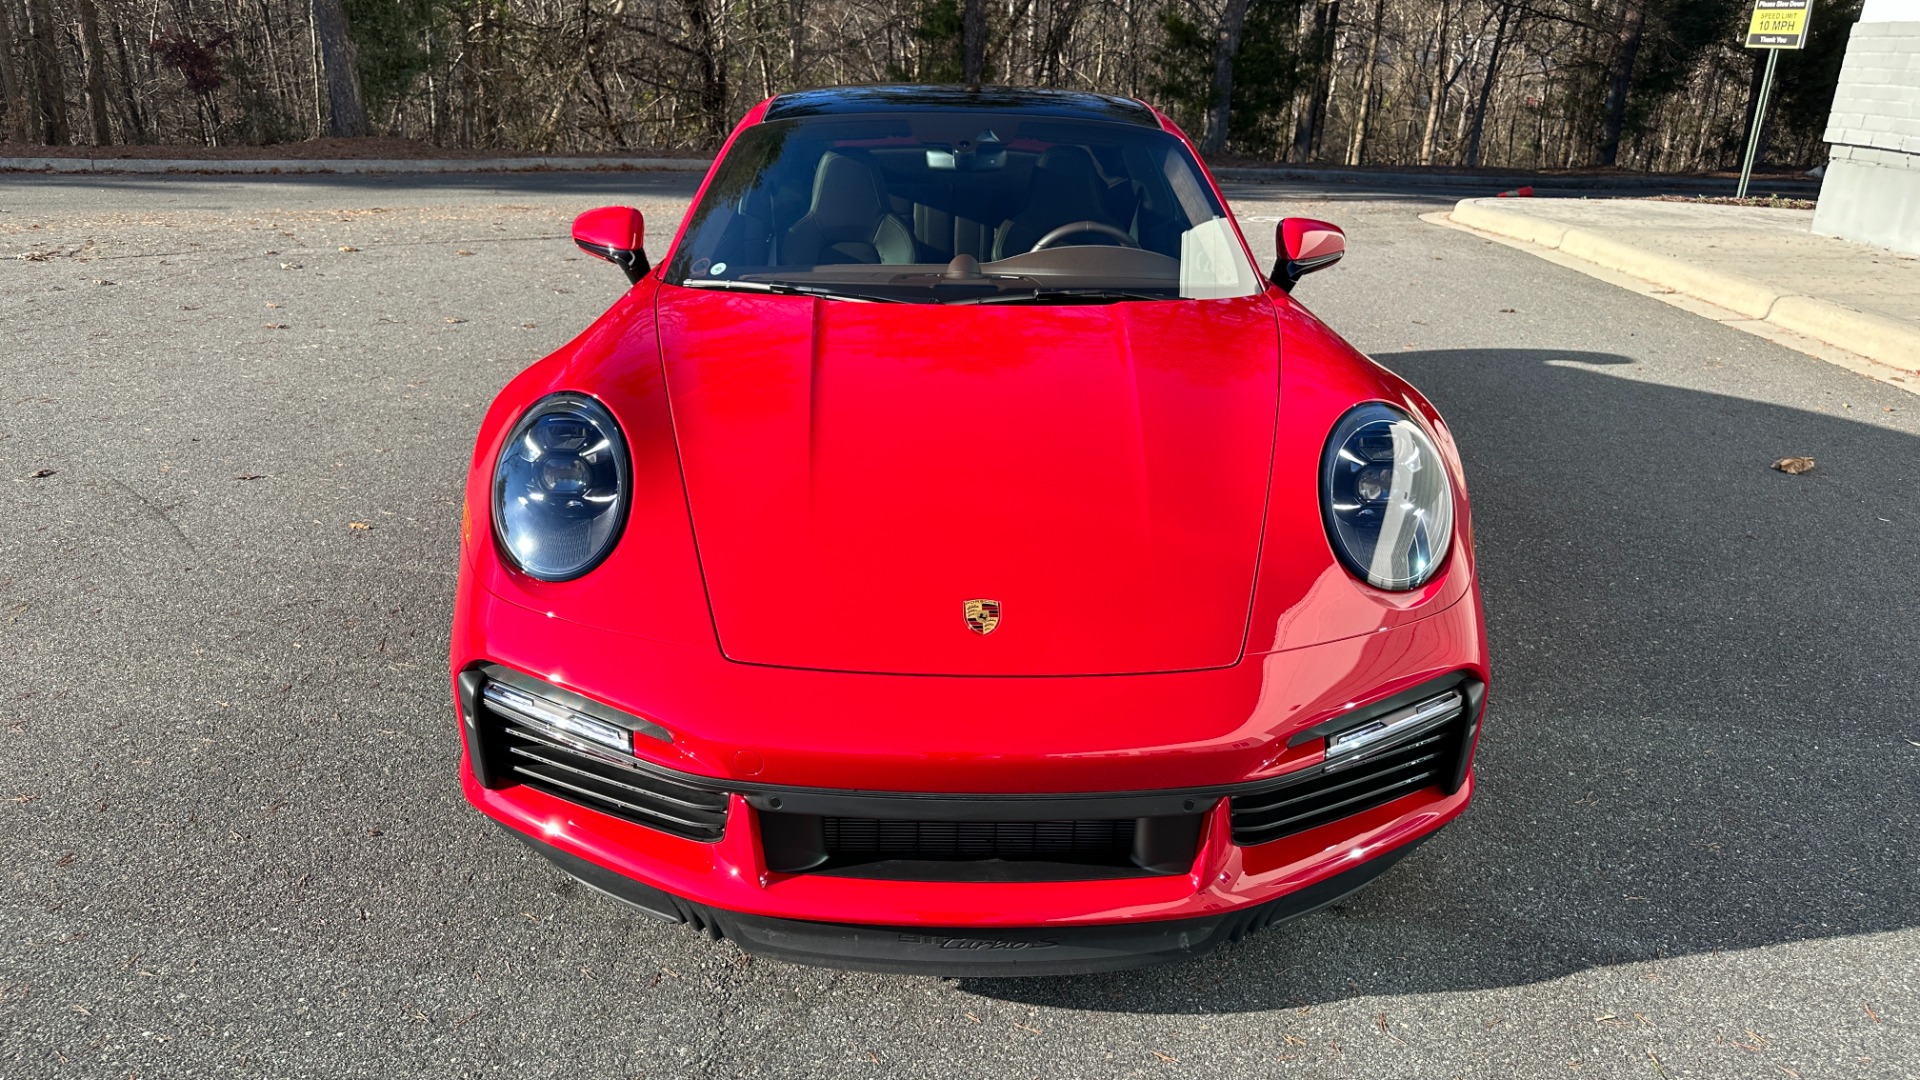 Used 2022 Porsche 911 Turbo S / PAINT PROTECTION / BURMESTER / SPORT EXHAUST / FRONT LIFT for sale $253,000 at Formula Imports in Charlotte NC 28227 10